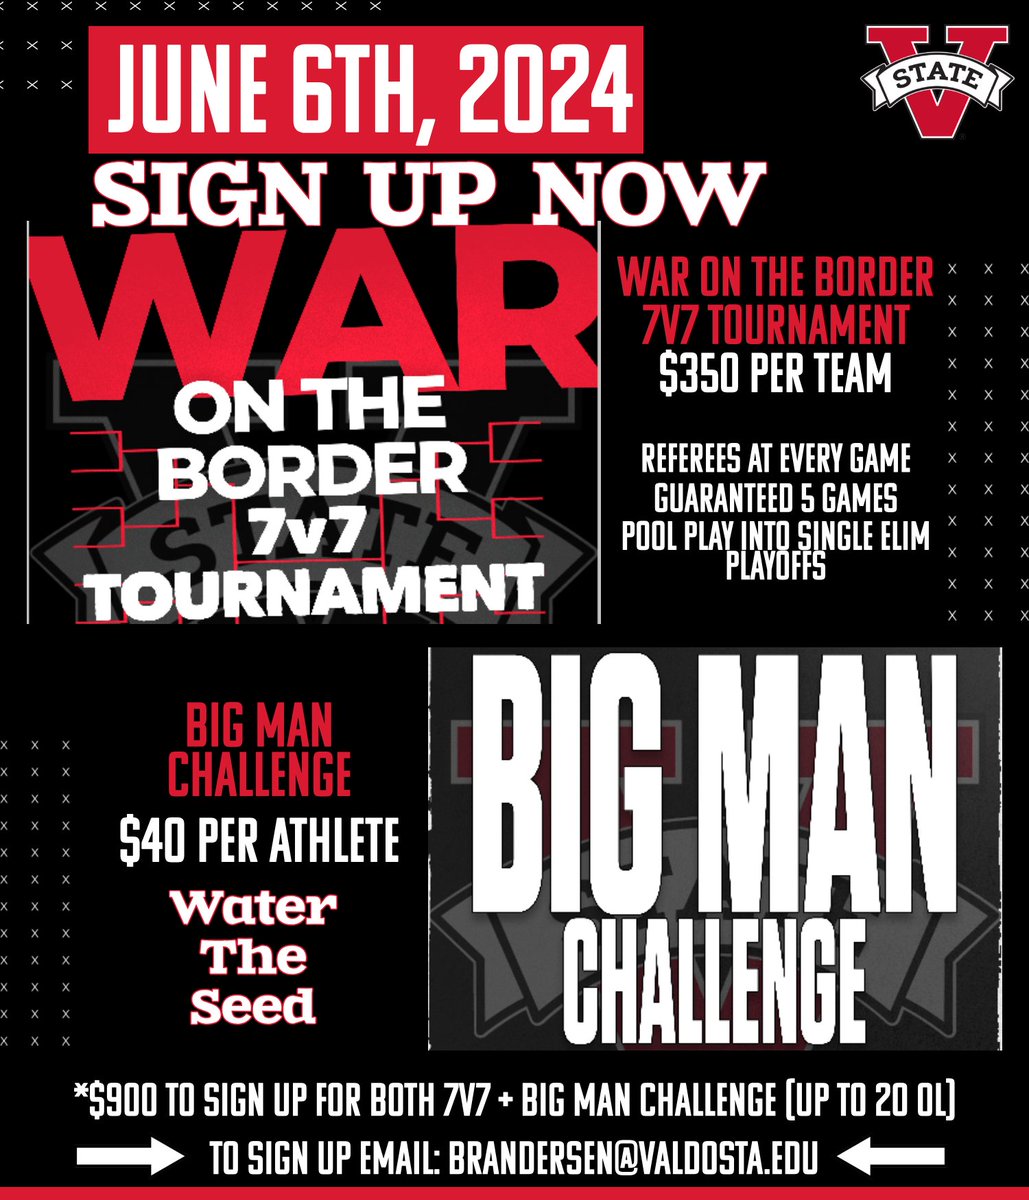 7v7 TOURNAMENT AND BIG MAN CHALLENGE SIGN UPS ARE OFFICIALLY LIVE😎 Don't miss your chance to get your team signed up‼️ Email: Brandersen@valdosta.edu to sign up! #WTS